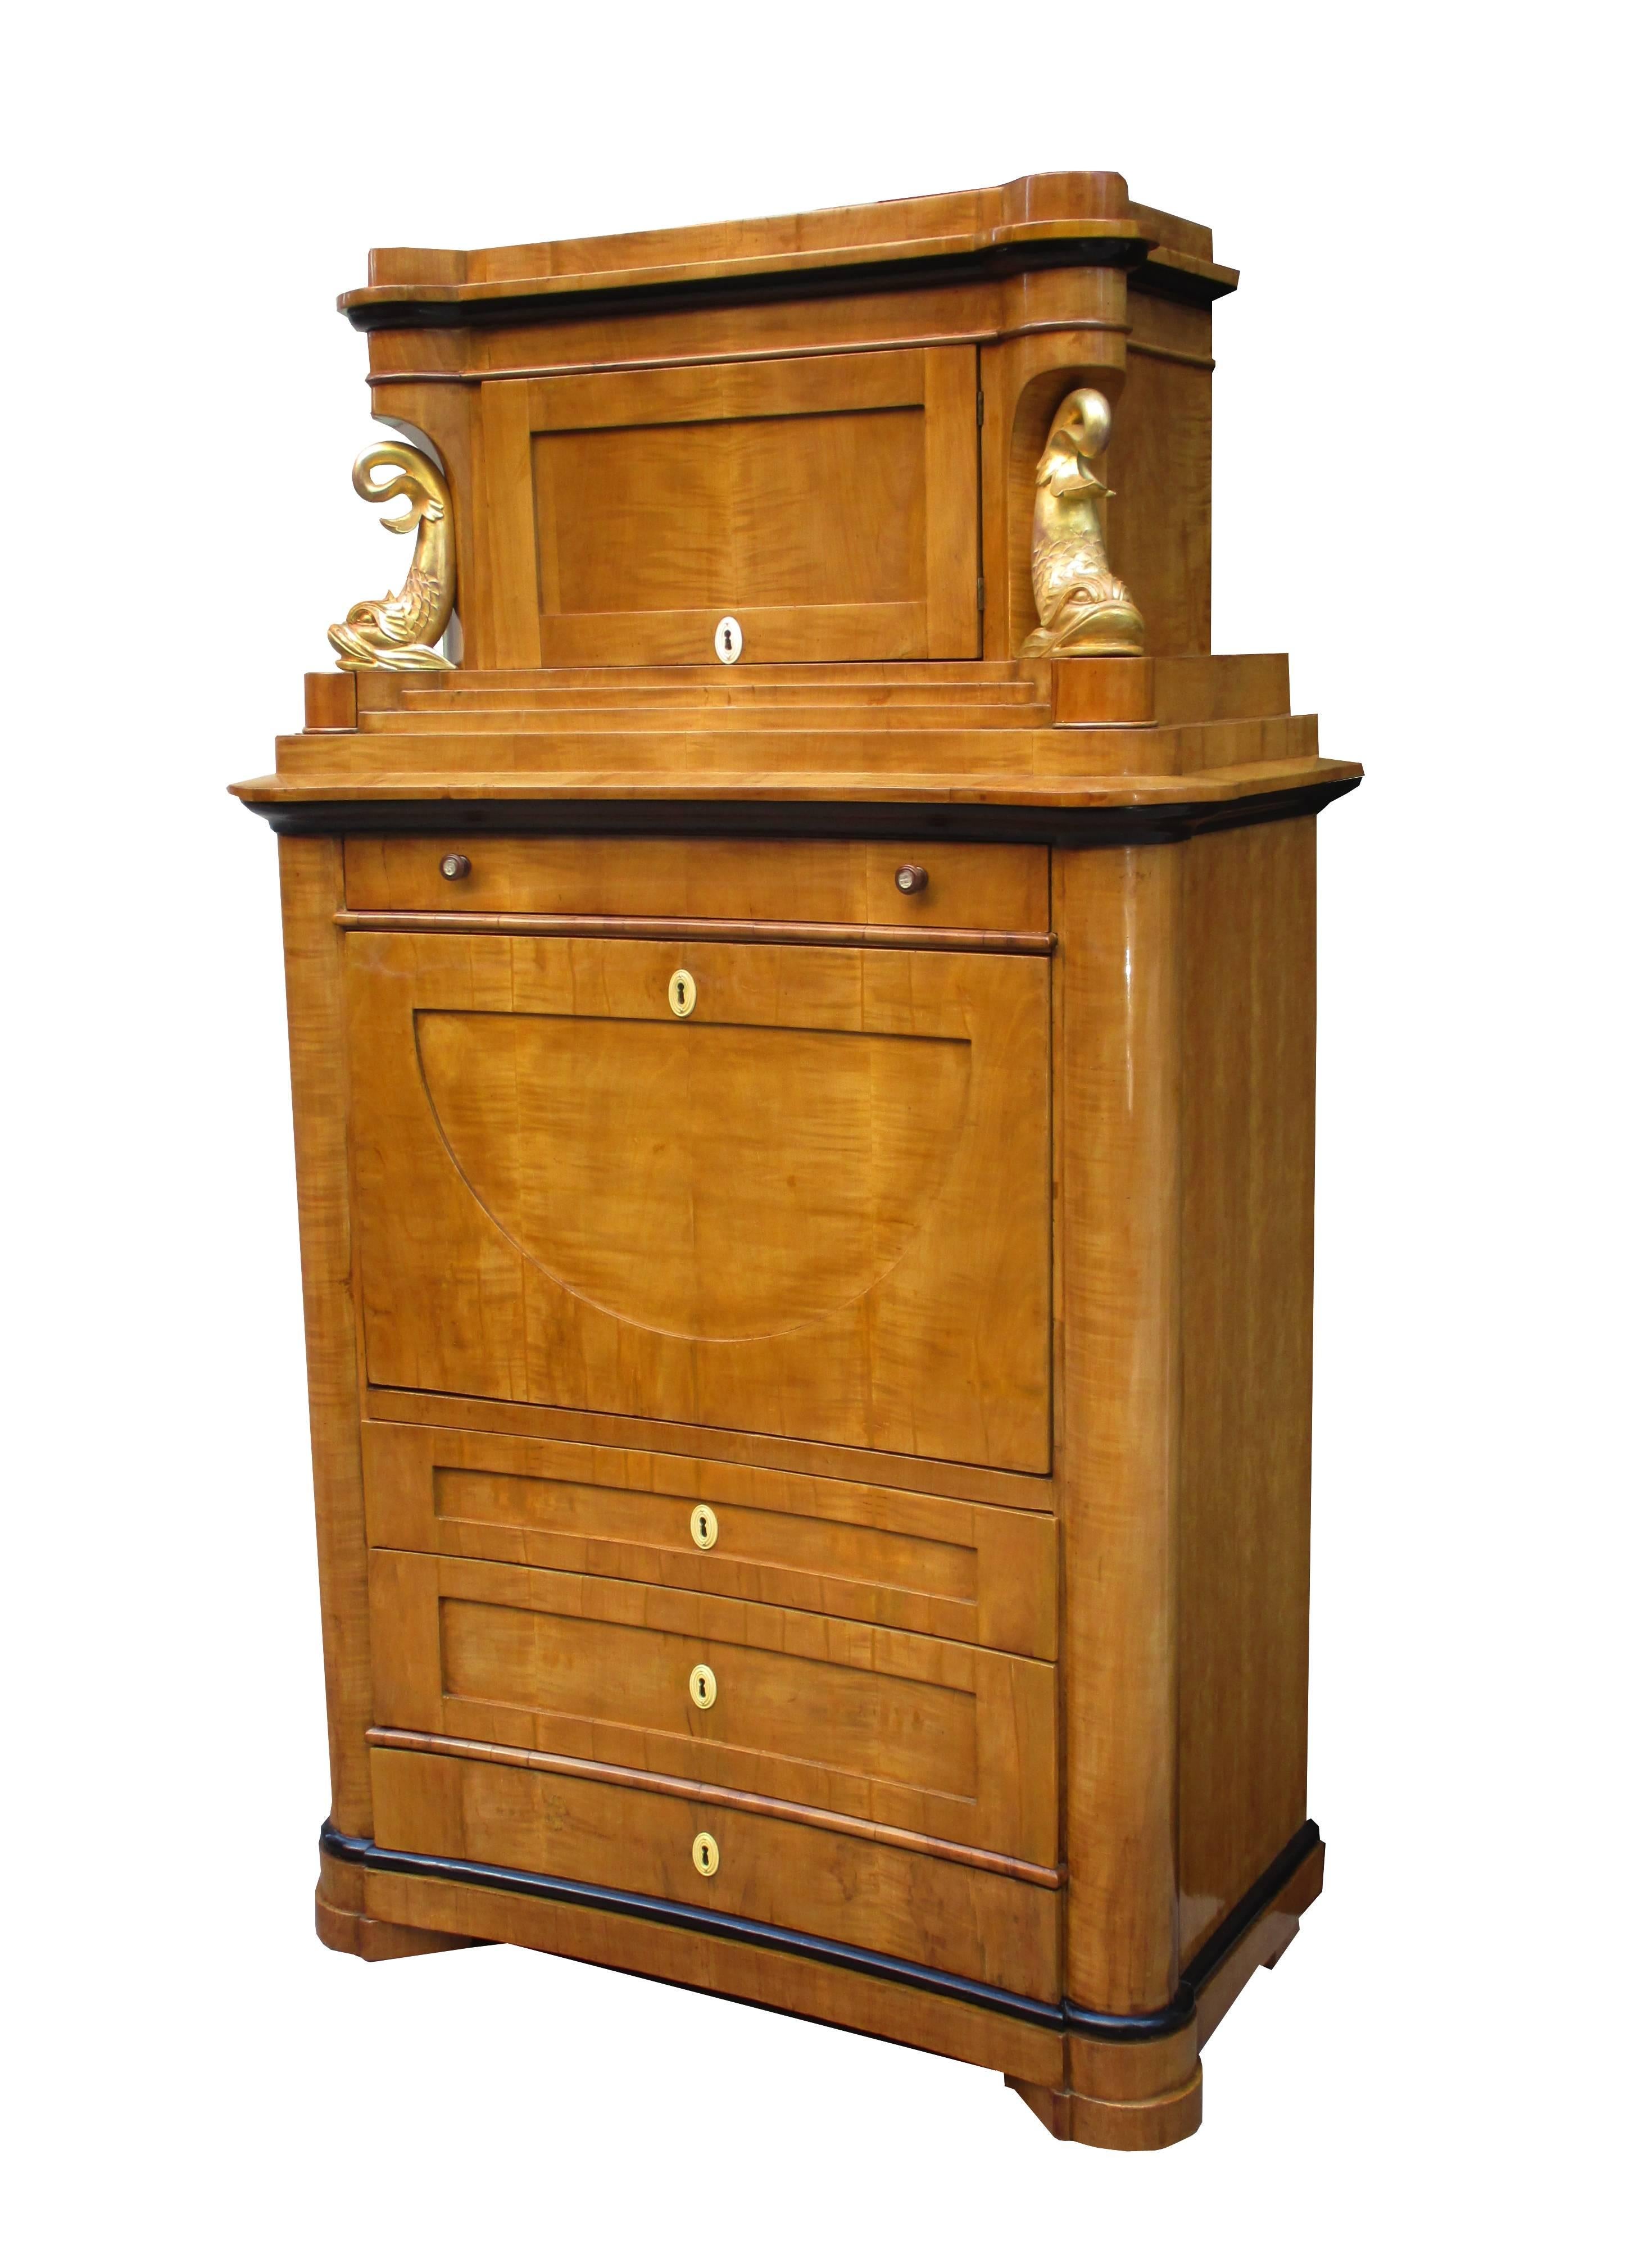 A fine Biedermeier secretary.
Cherrywood with ebonized fruitwood details,
carved giltwood details. Interior drawers in birch burl
with pull-out writing surface featuring a leather top.